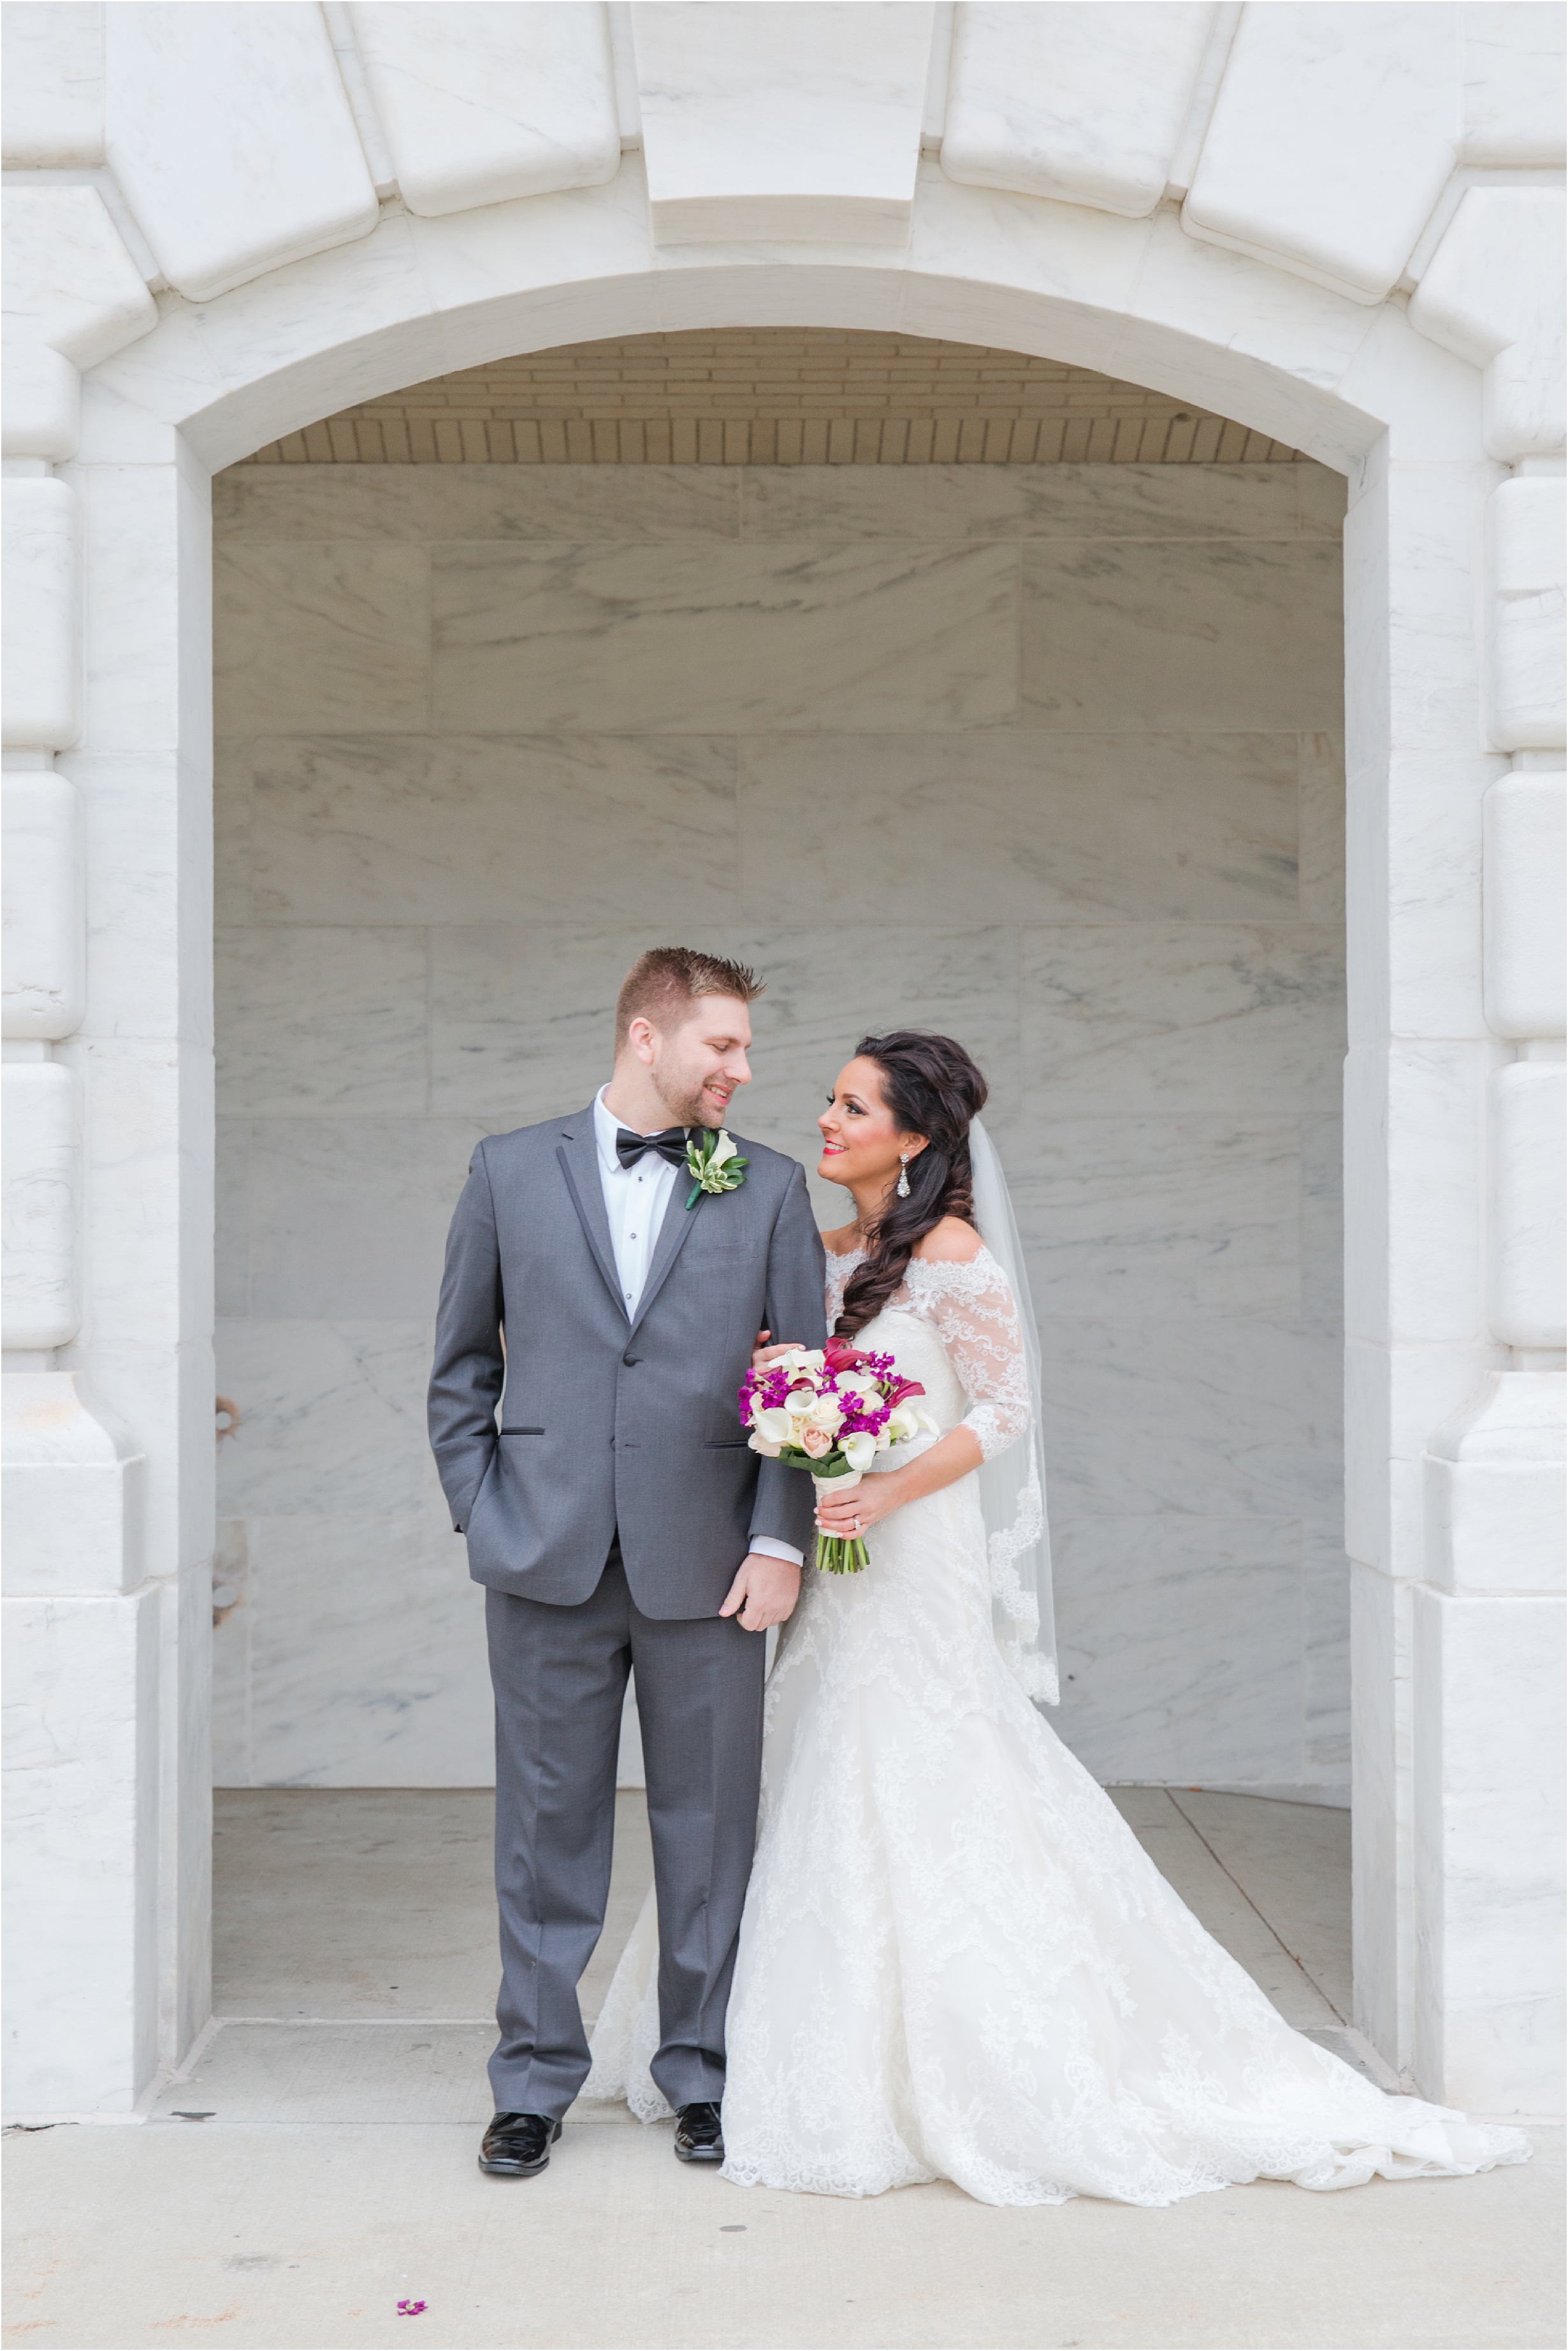 romantic-timeless-candid-wedding-photos-at-the-detroit-institute-of-arts-in-detroit-mi-by-courtney-carolyn-photography_0007.jpg